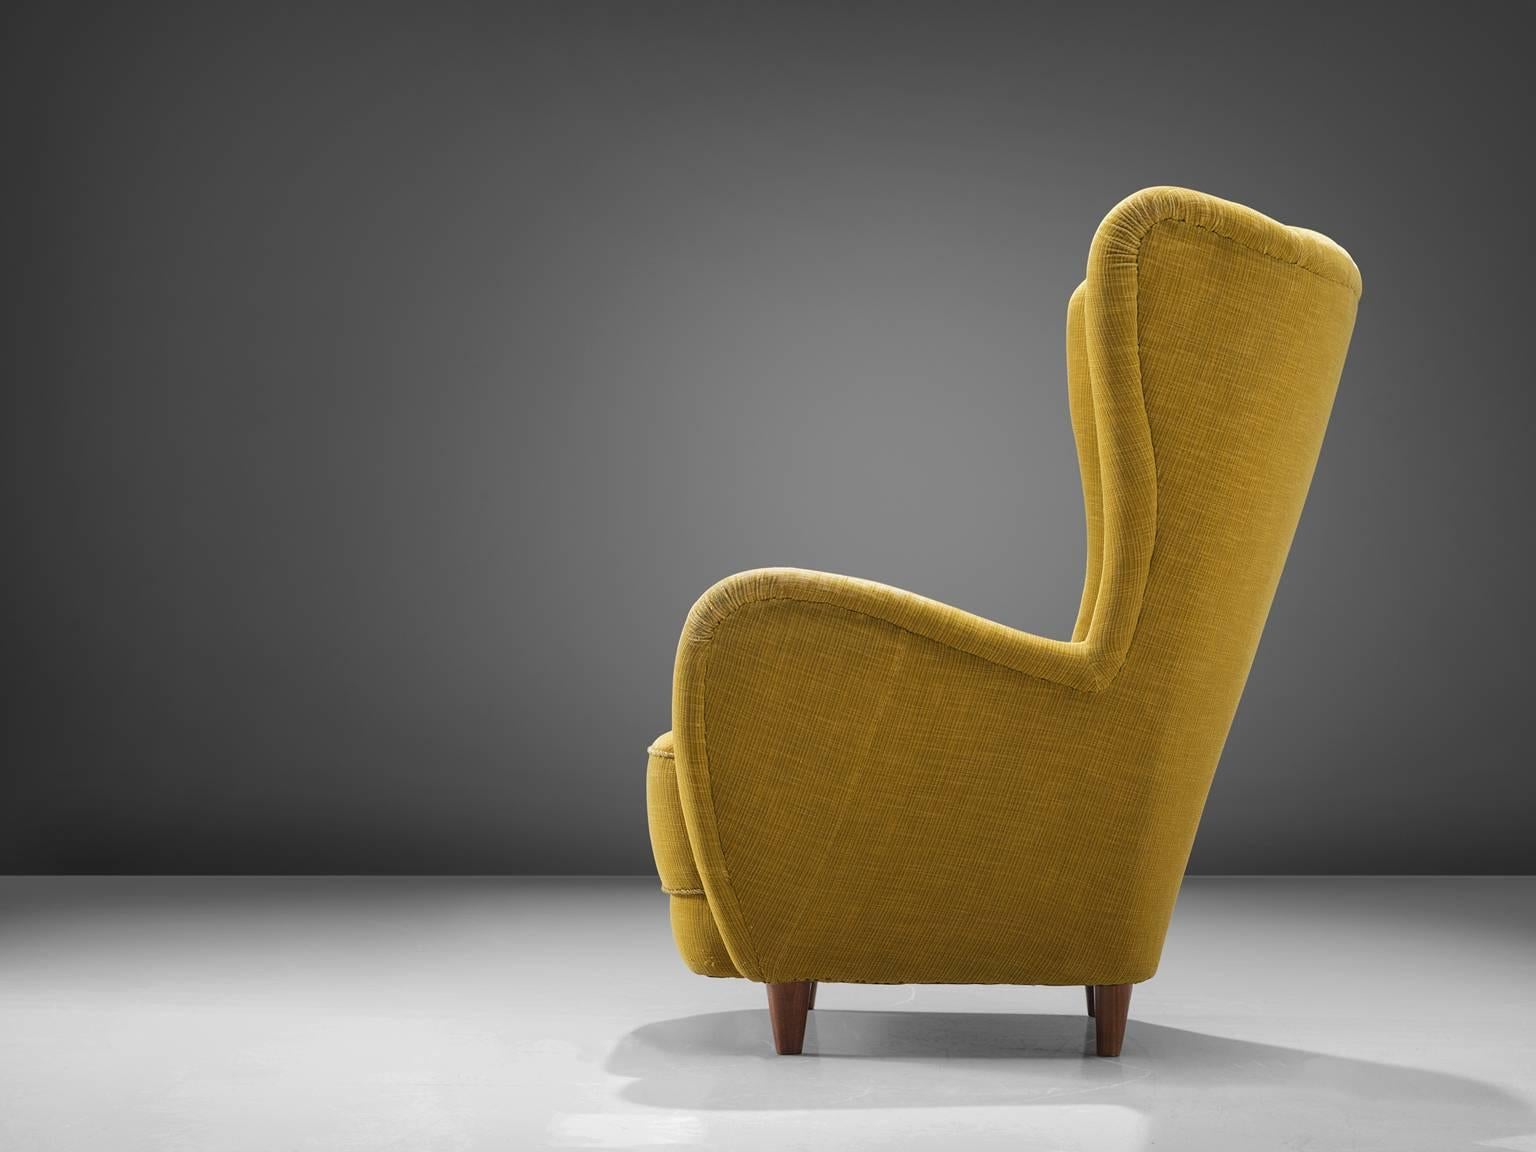 yellow wingback chairs